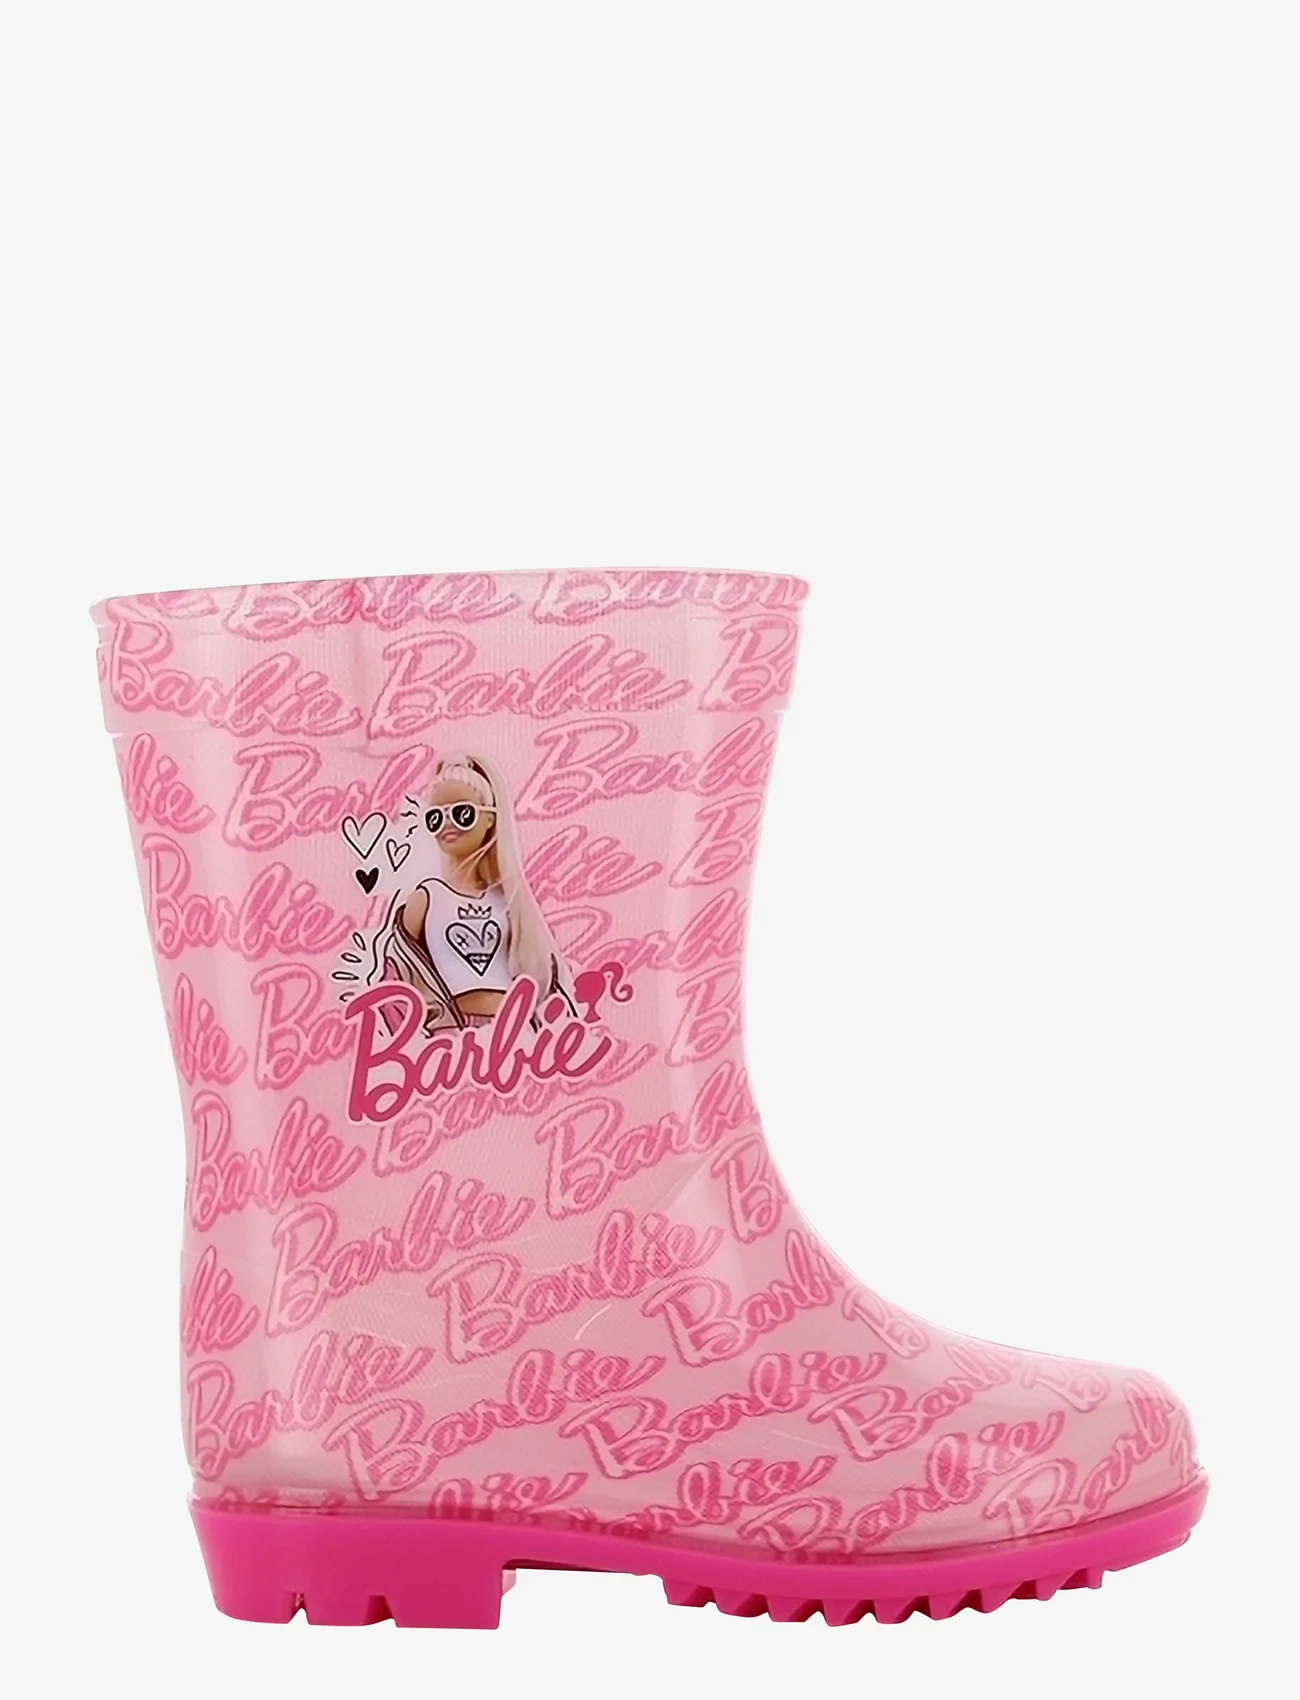 Leomil - BARBIE rainboots - unlined rubberboots - pink/pink - 0